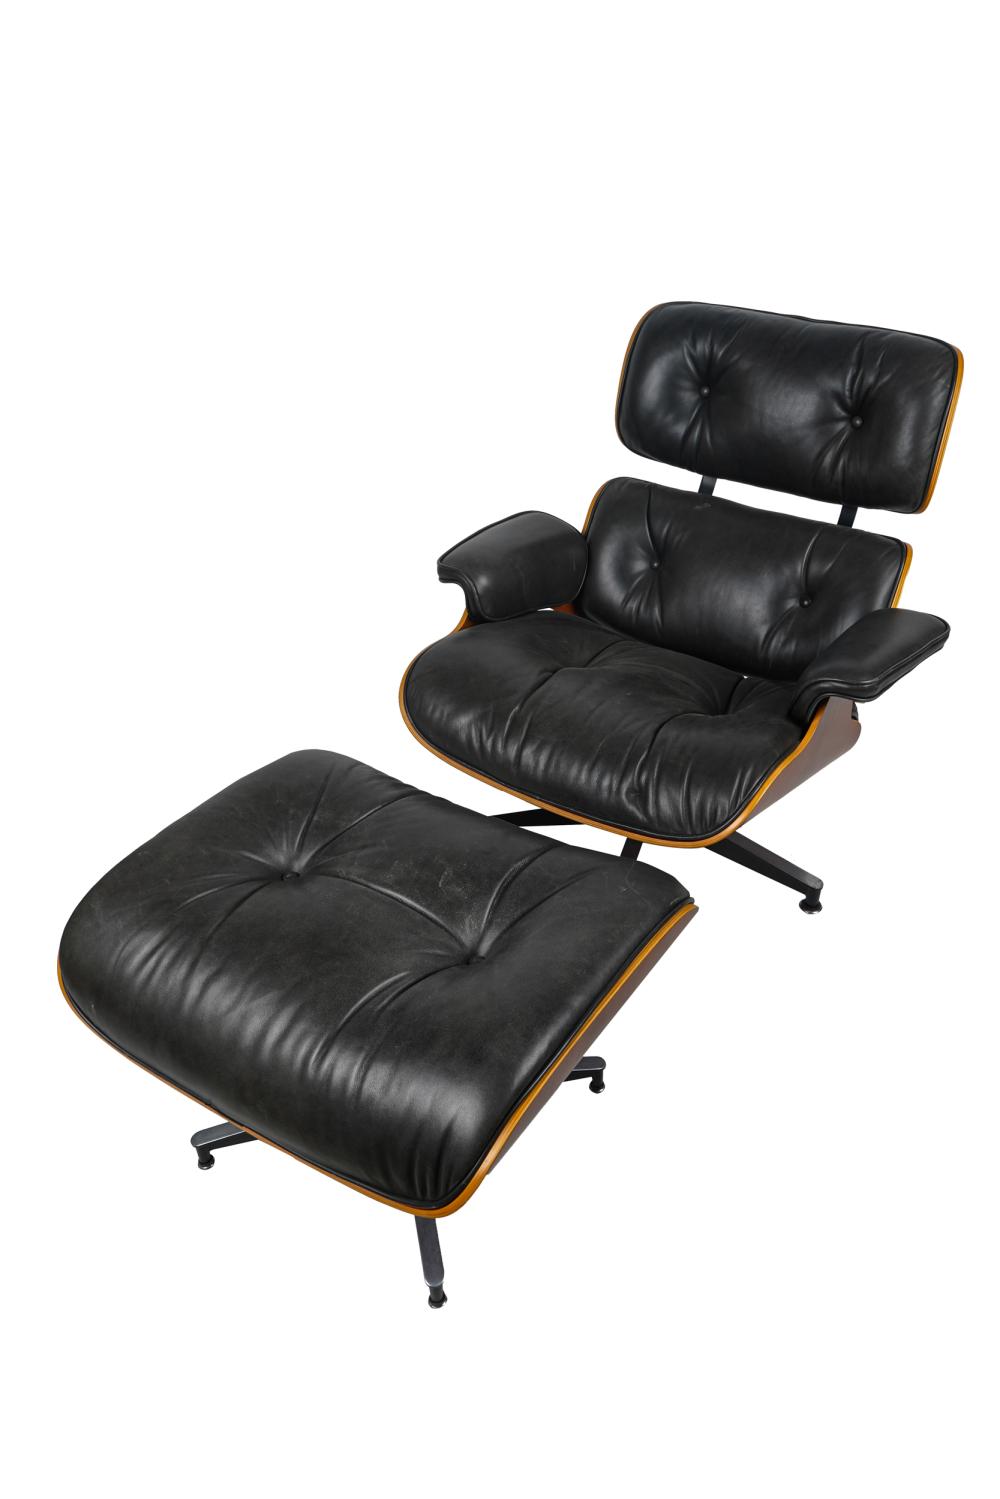 CHARLES & RAY EAMES LOUNGE CHAIR